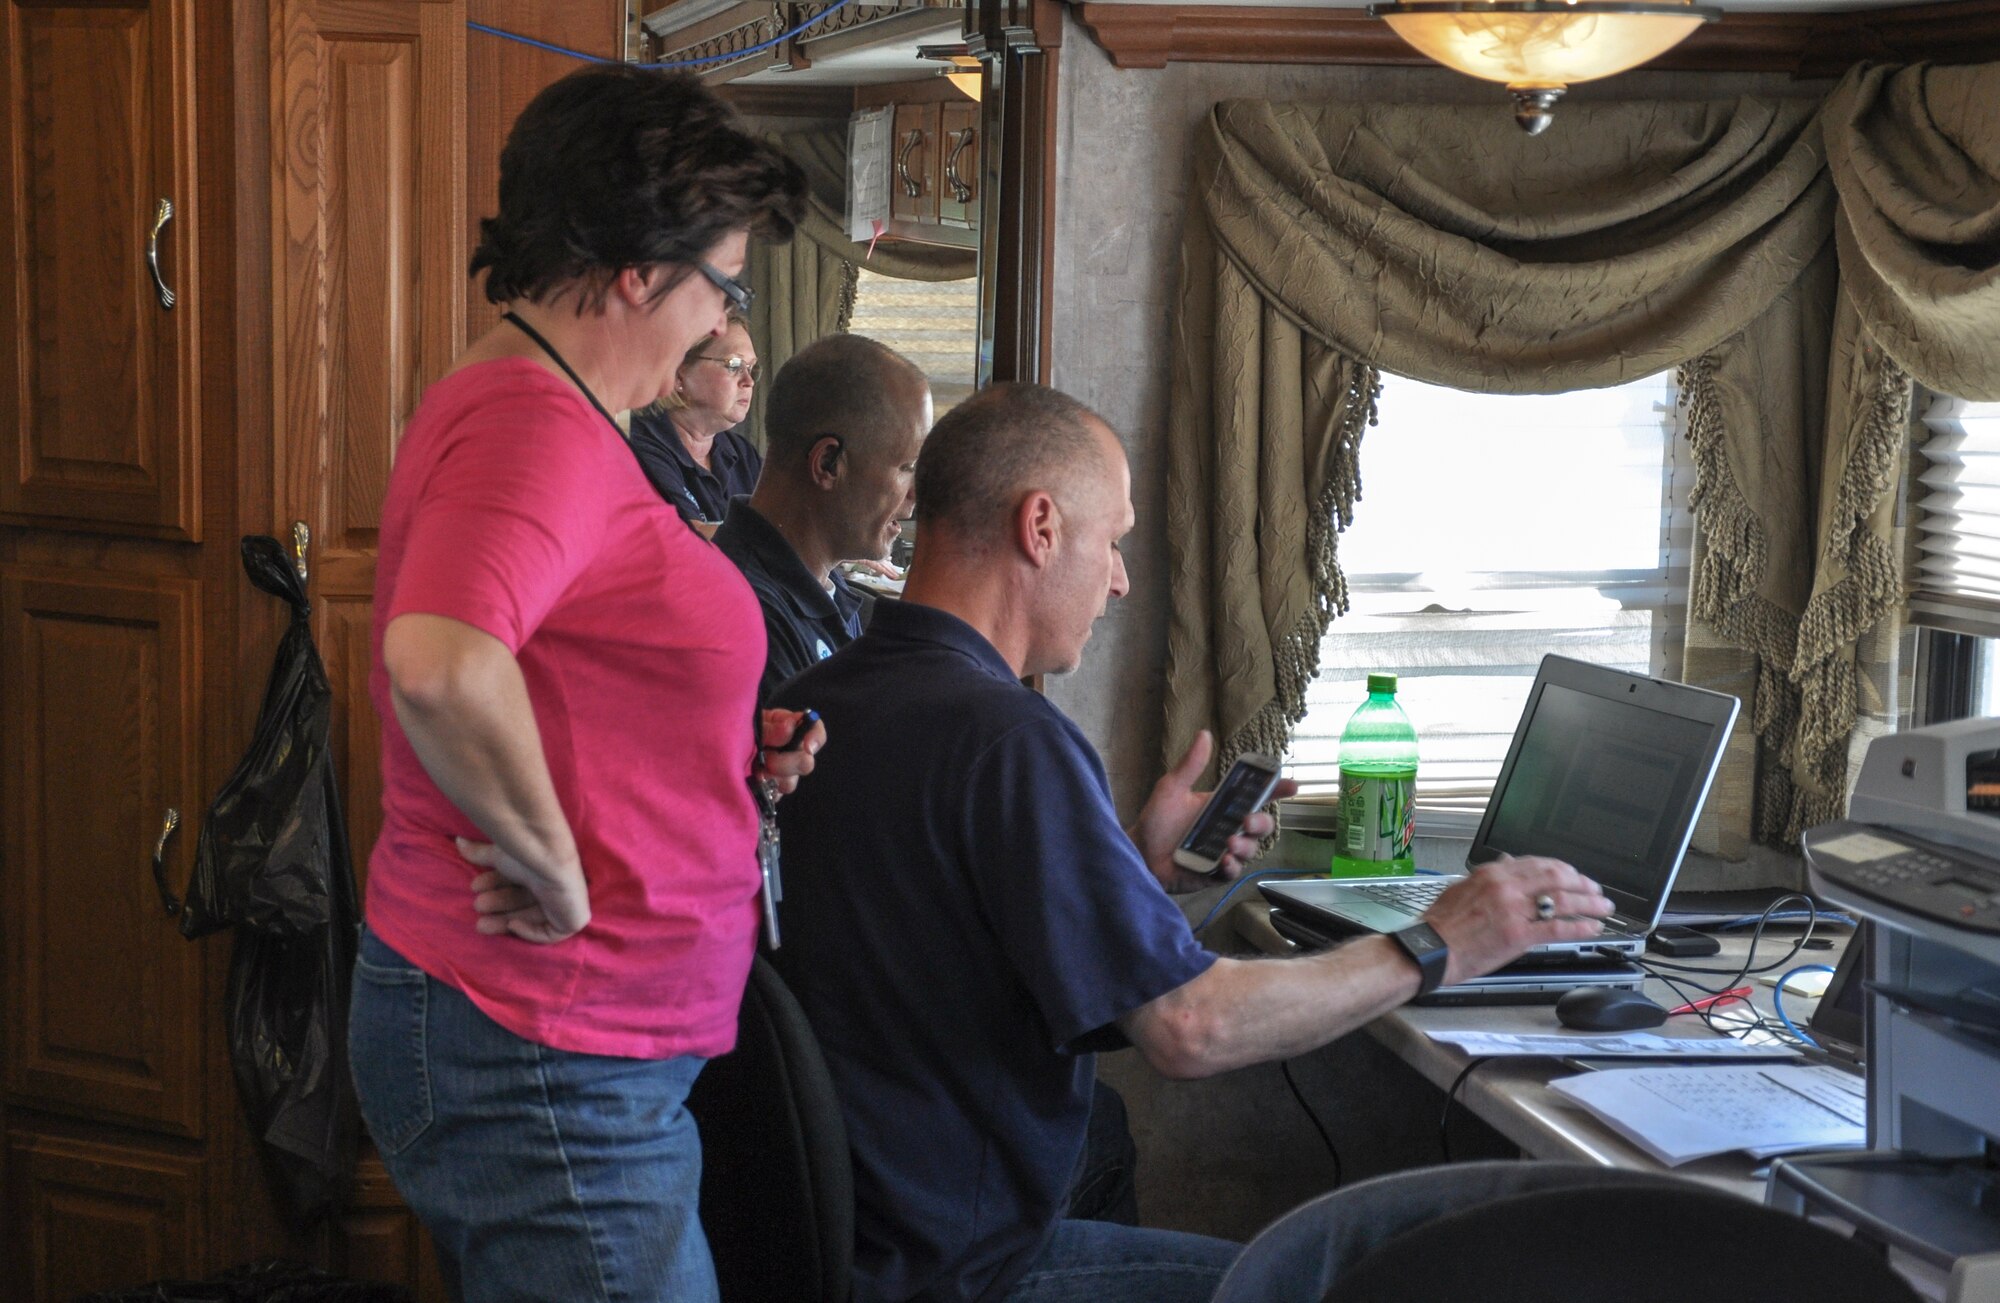 Federal Emergency Management Agency team members work inside the mobile command center Sept. 16, 2013, at Buckley Air Force Base, Colo. FEMA began staging operations out of Buckley Sept. 14, 2013, after Gov. John Hickenlooper declared a national emergency and President Barack Obama approved federal support. Major flood relief efforts became necessary after up to 15 inches of rain fell along the Front Range causing flash flooding, according to weather services. (U.S. Air Force photo by Staff Sgt. Nicholas Rau/Released)